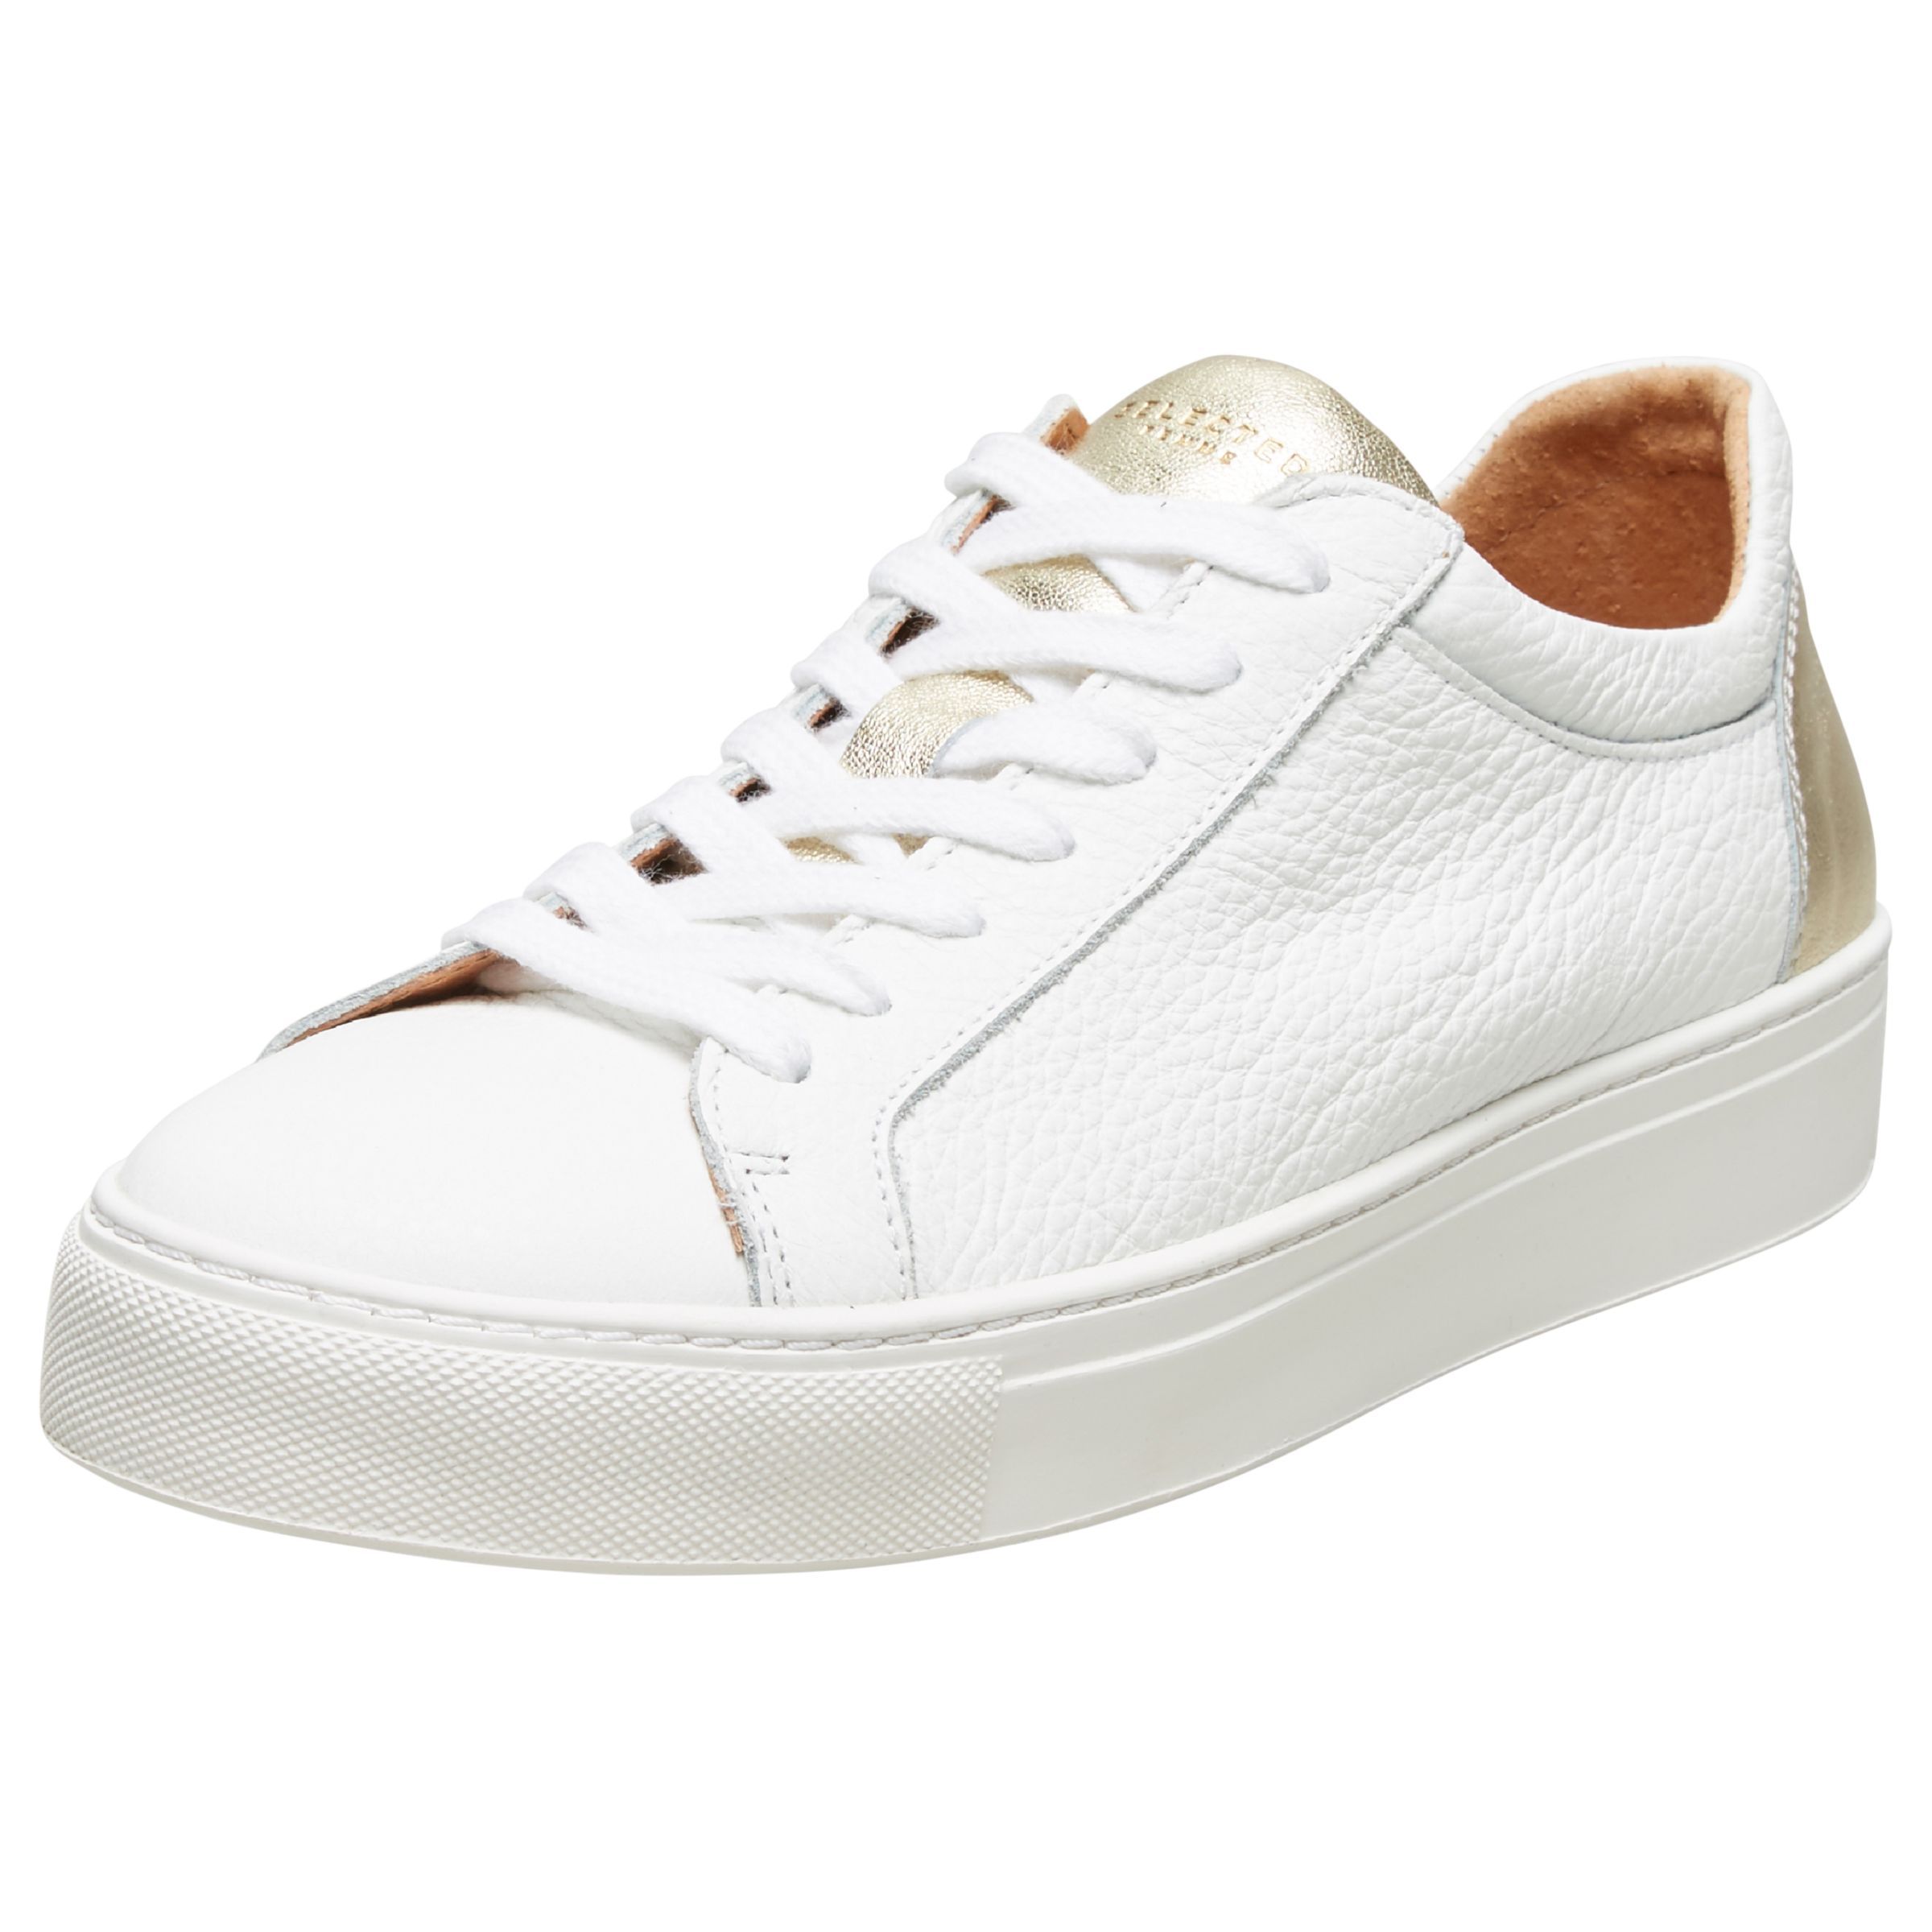 Selected Femme Donna Contrast Trainers